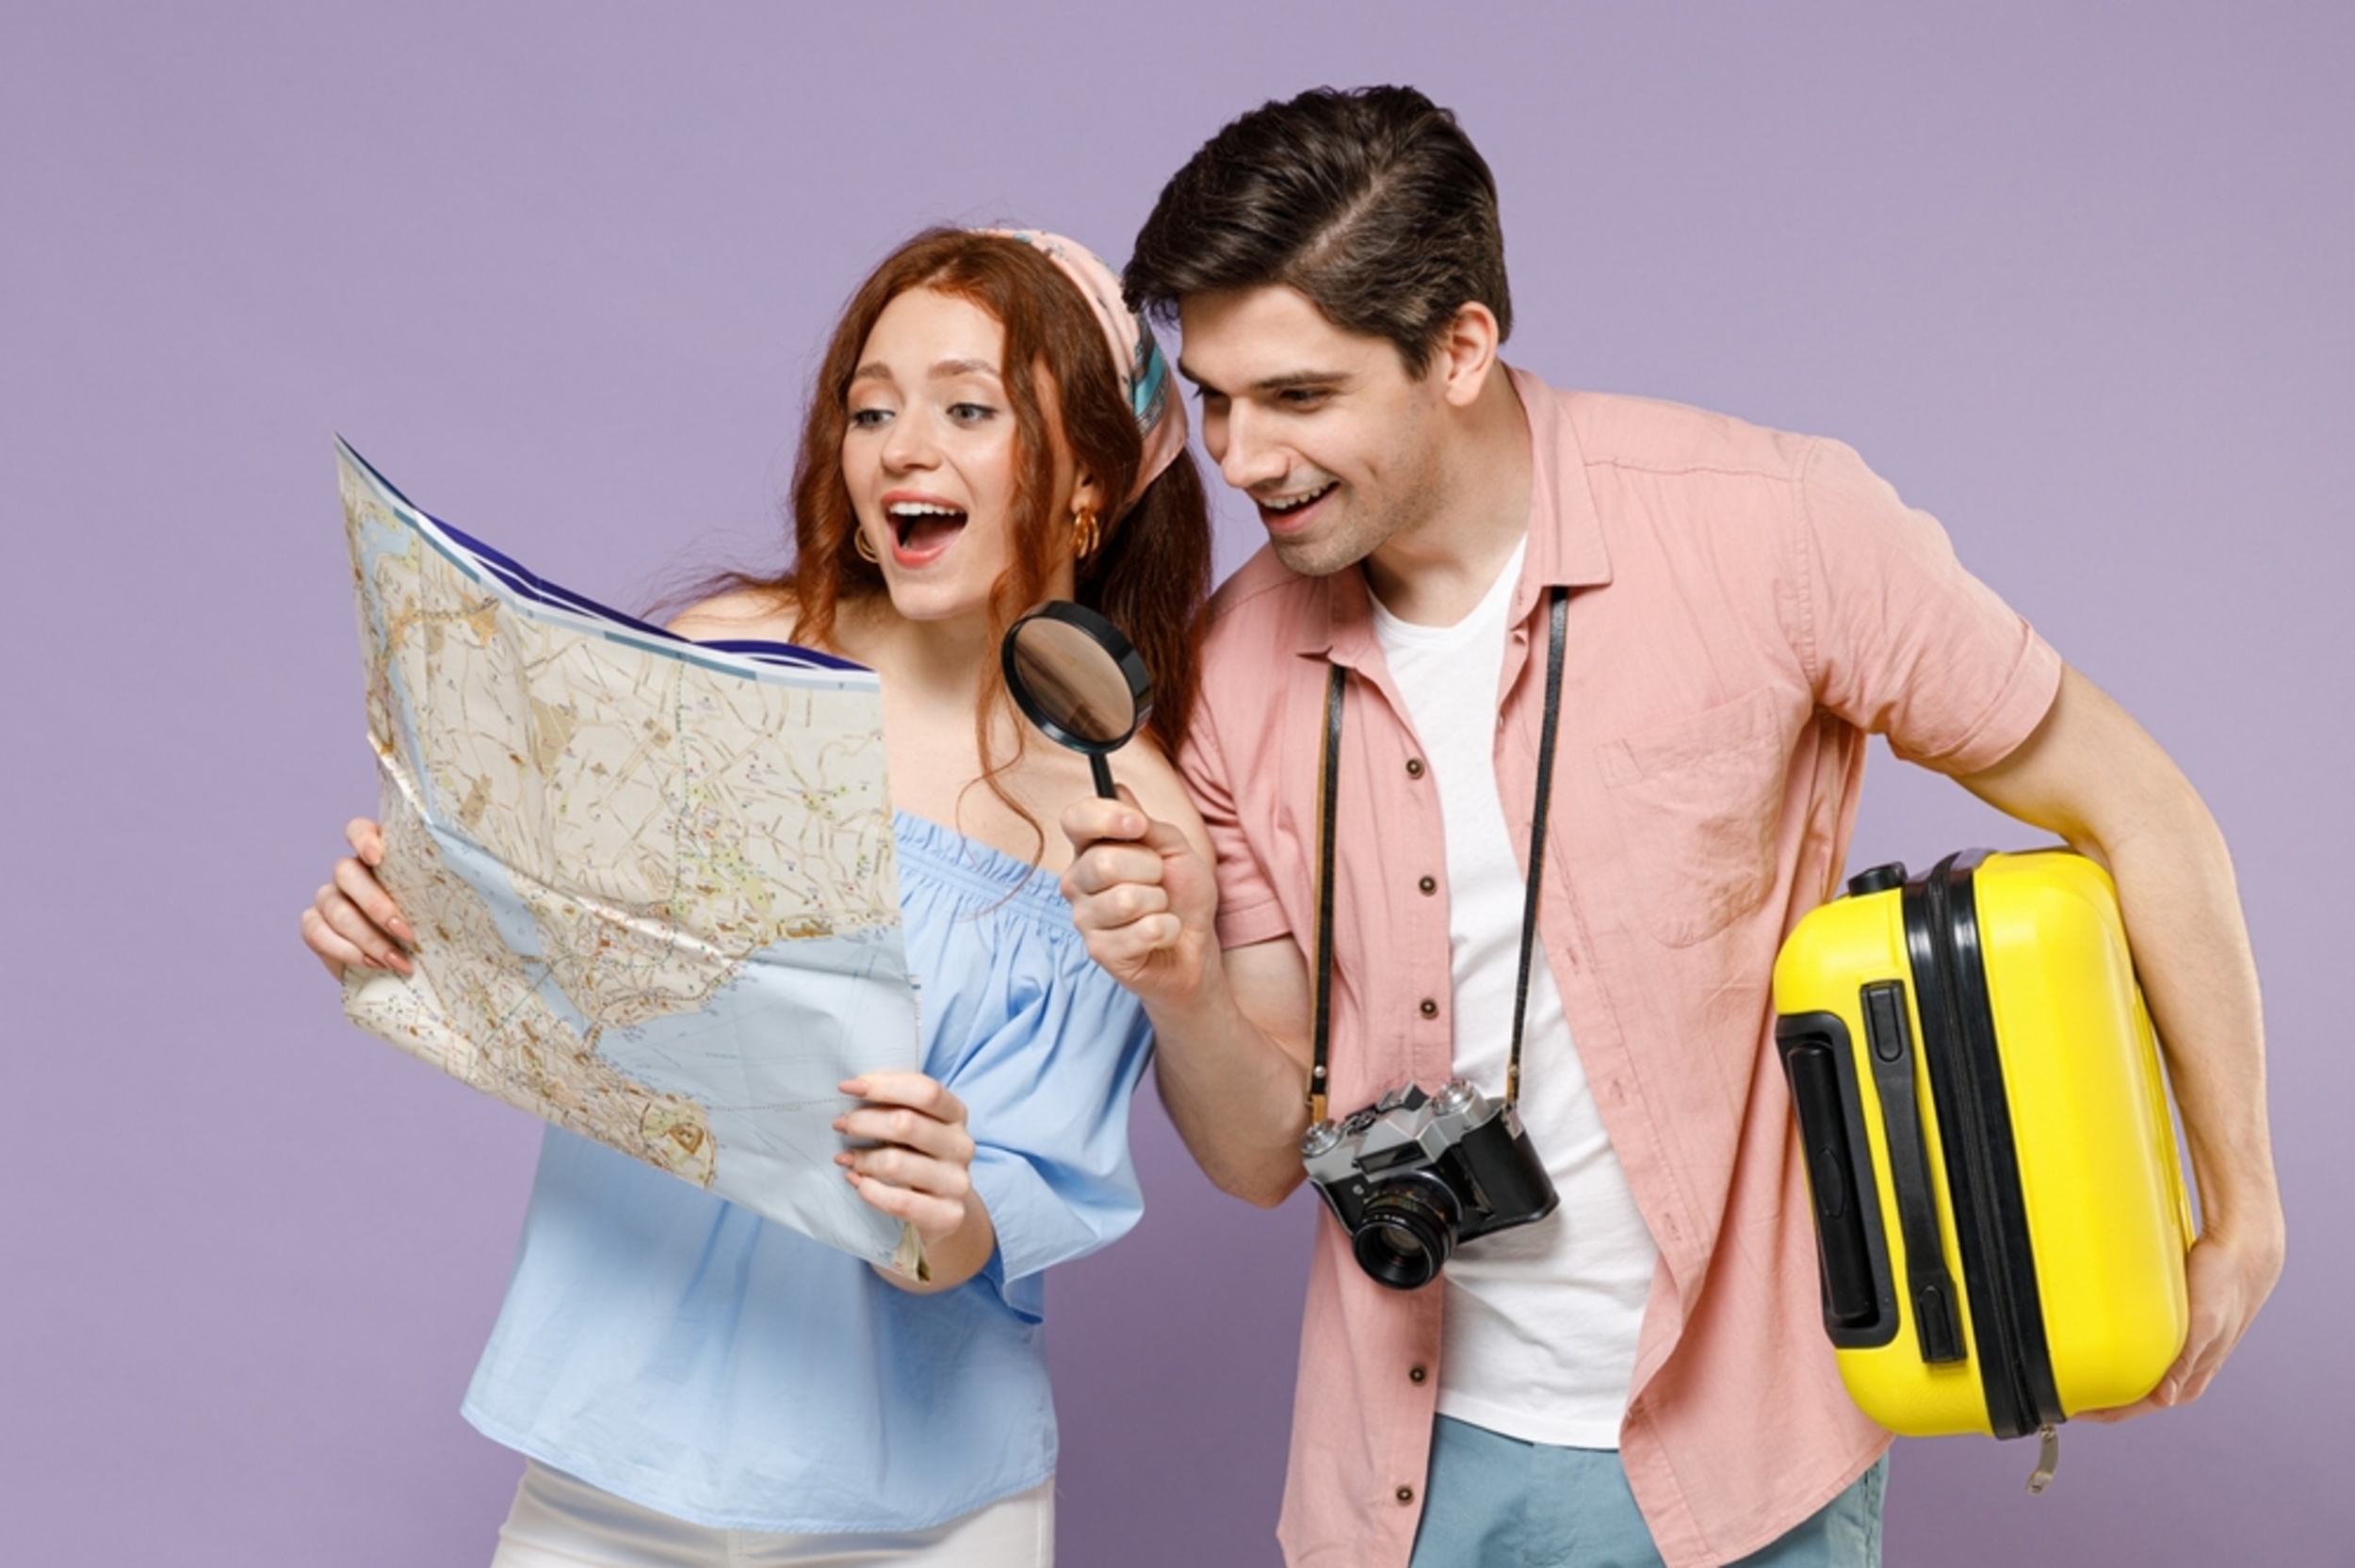 <p>It sounds boring, but planning an itinerary in advance of your trip can really help you make the most of your time. Spend a little time researching travel routes, finding cool activities to do, and trying to plan in a way that allows you to maximize the days you've got in the mountains or at the beach. </p><p>You may also like: <a href='https://www.yardbarker.com/lifestyle/articles/15_things_you_must_do_in_santa_barbara_012524/s1__37505745'>15 things you must do in Santa Barbara</a></p>